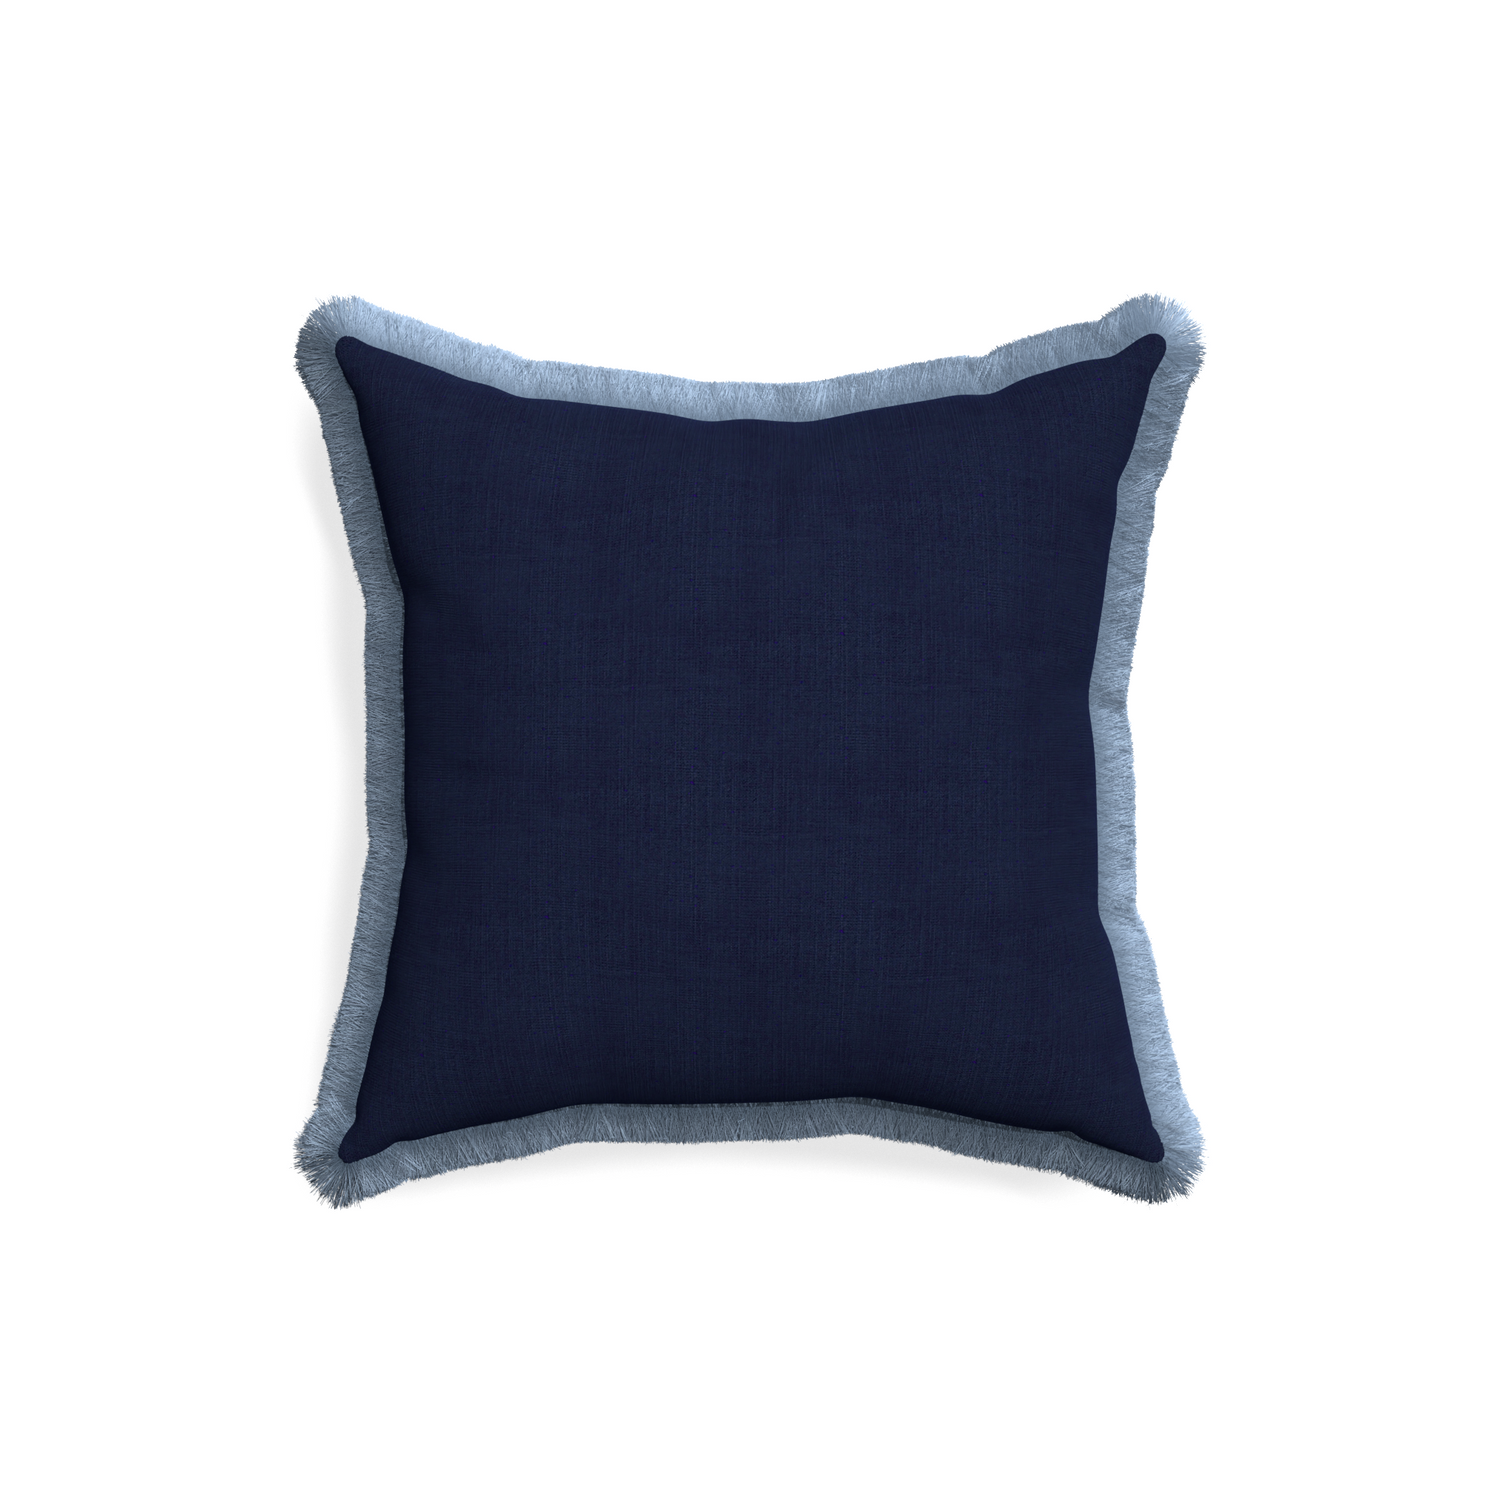 18-square midnight custom navy bluepillow with sky fringe on white background